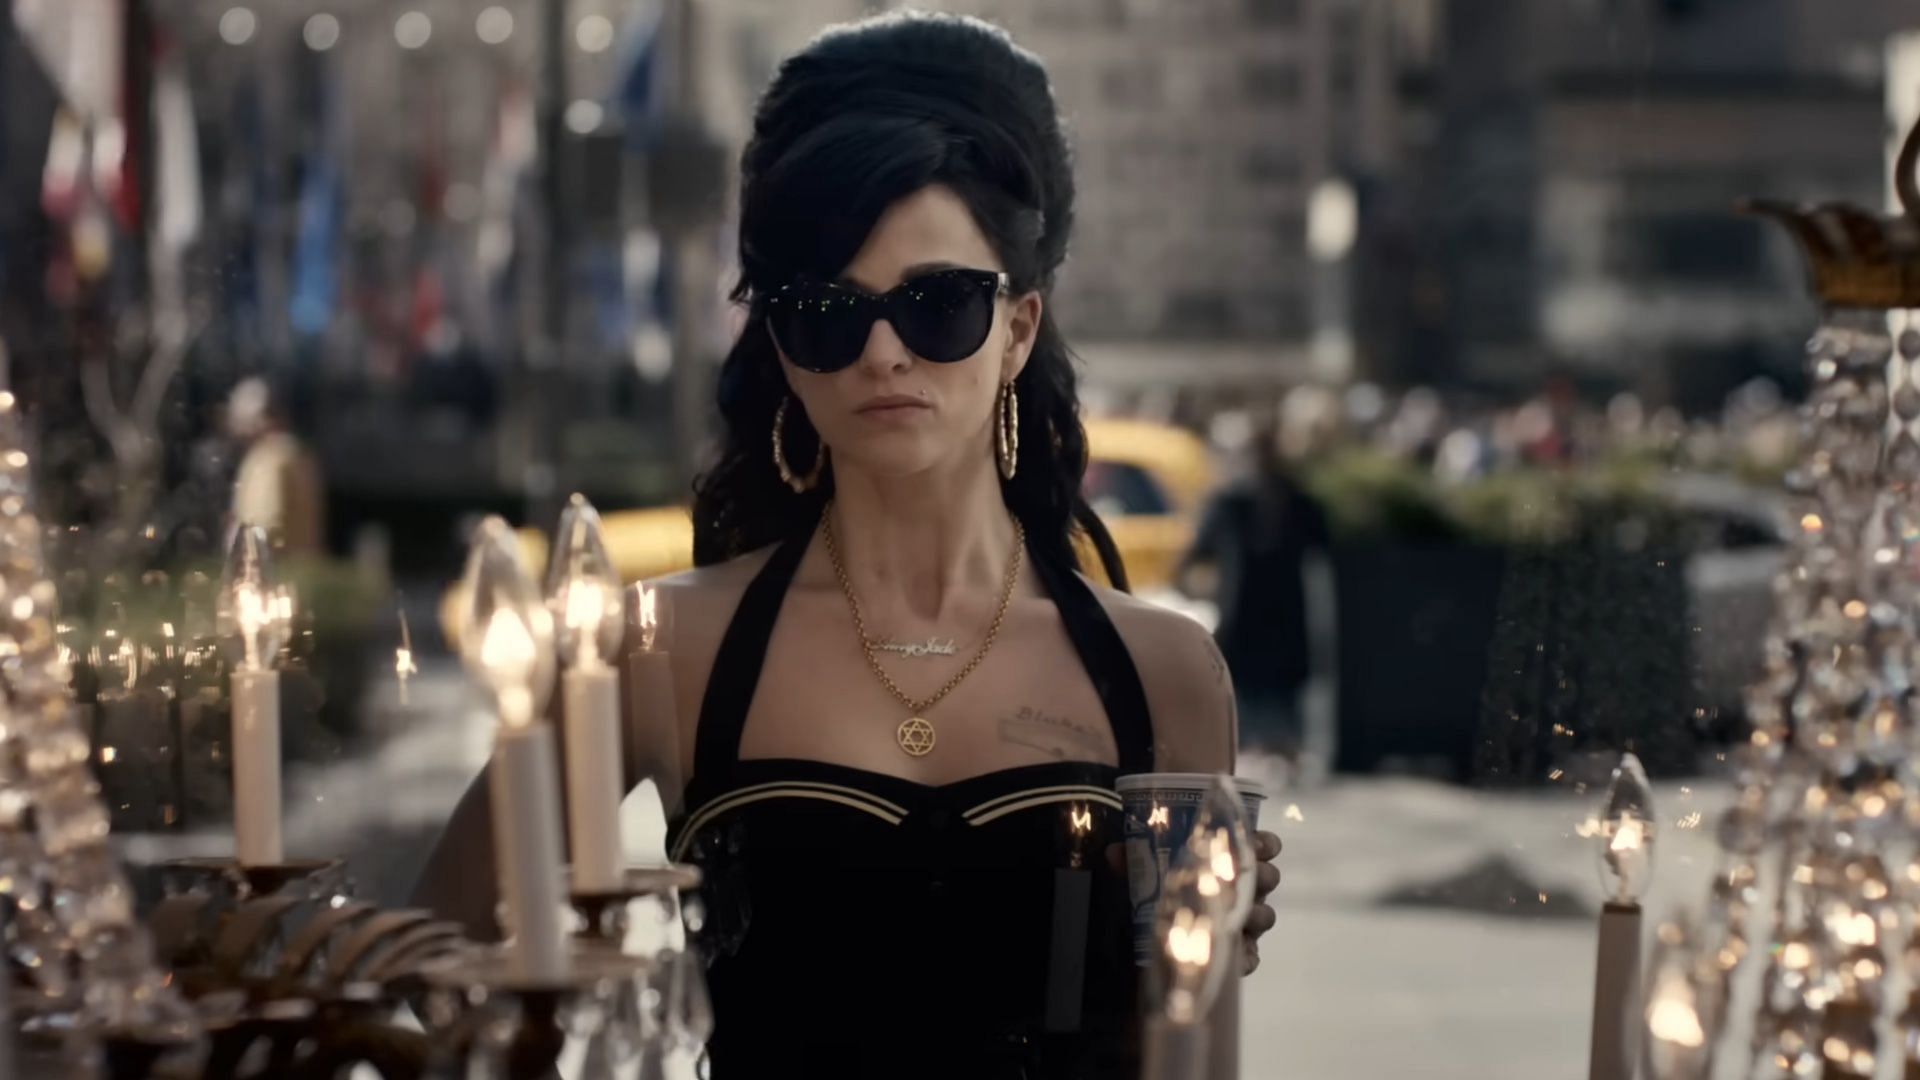 Marisa Abela opened up about playing Amy Winehouse (Image via YouTube/Focus Features)